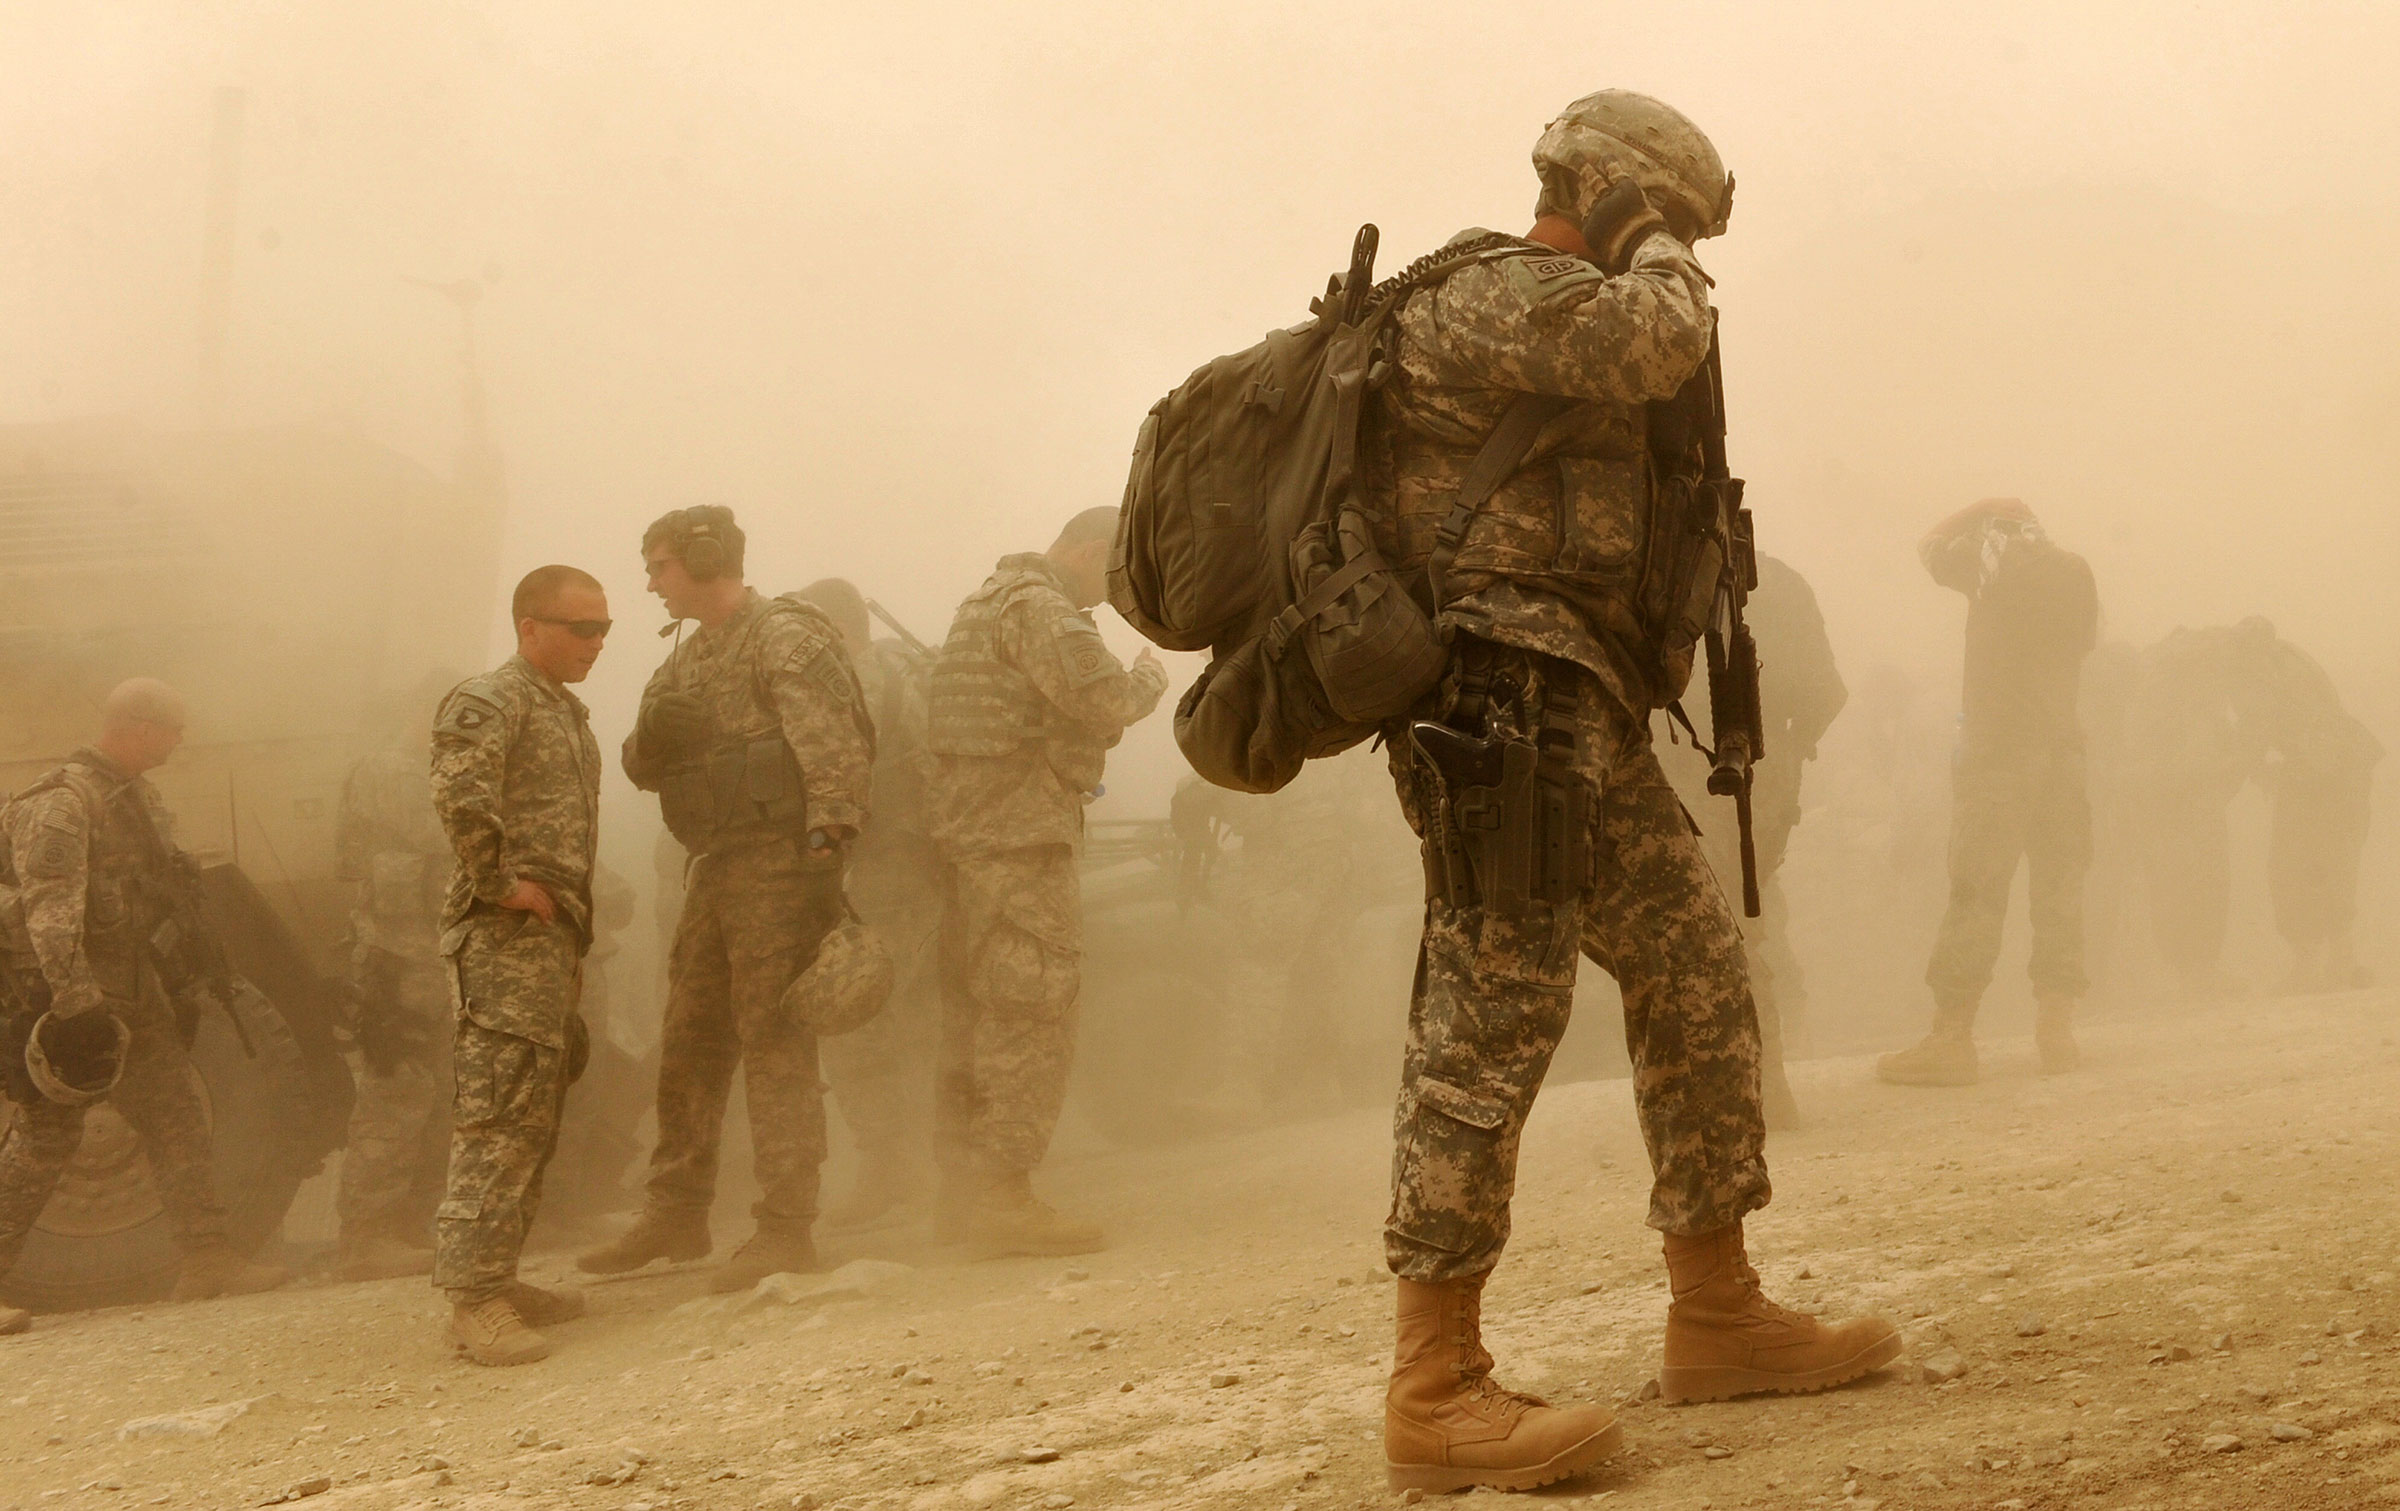 US Army soldiers walk at US military Camp Wilderness in Khost province, Afghanistan on April 10, 2010. (Massoud Hossaini—AFP/Getty Images)